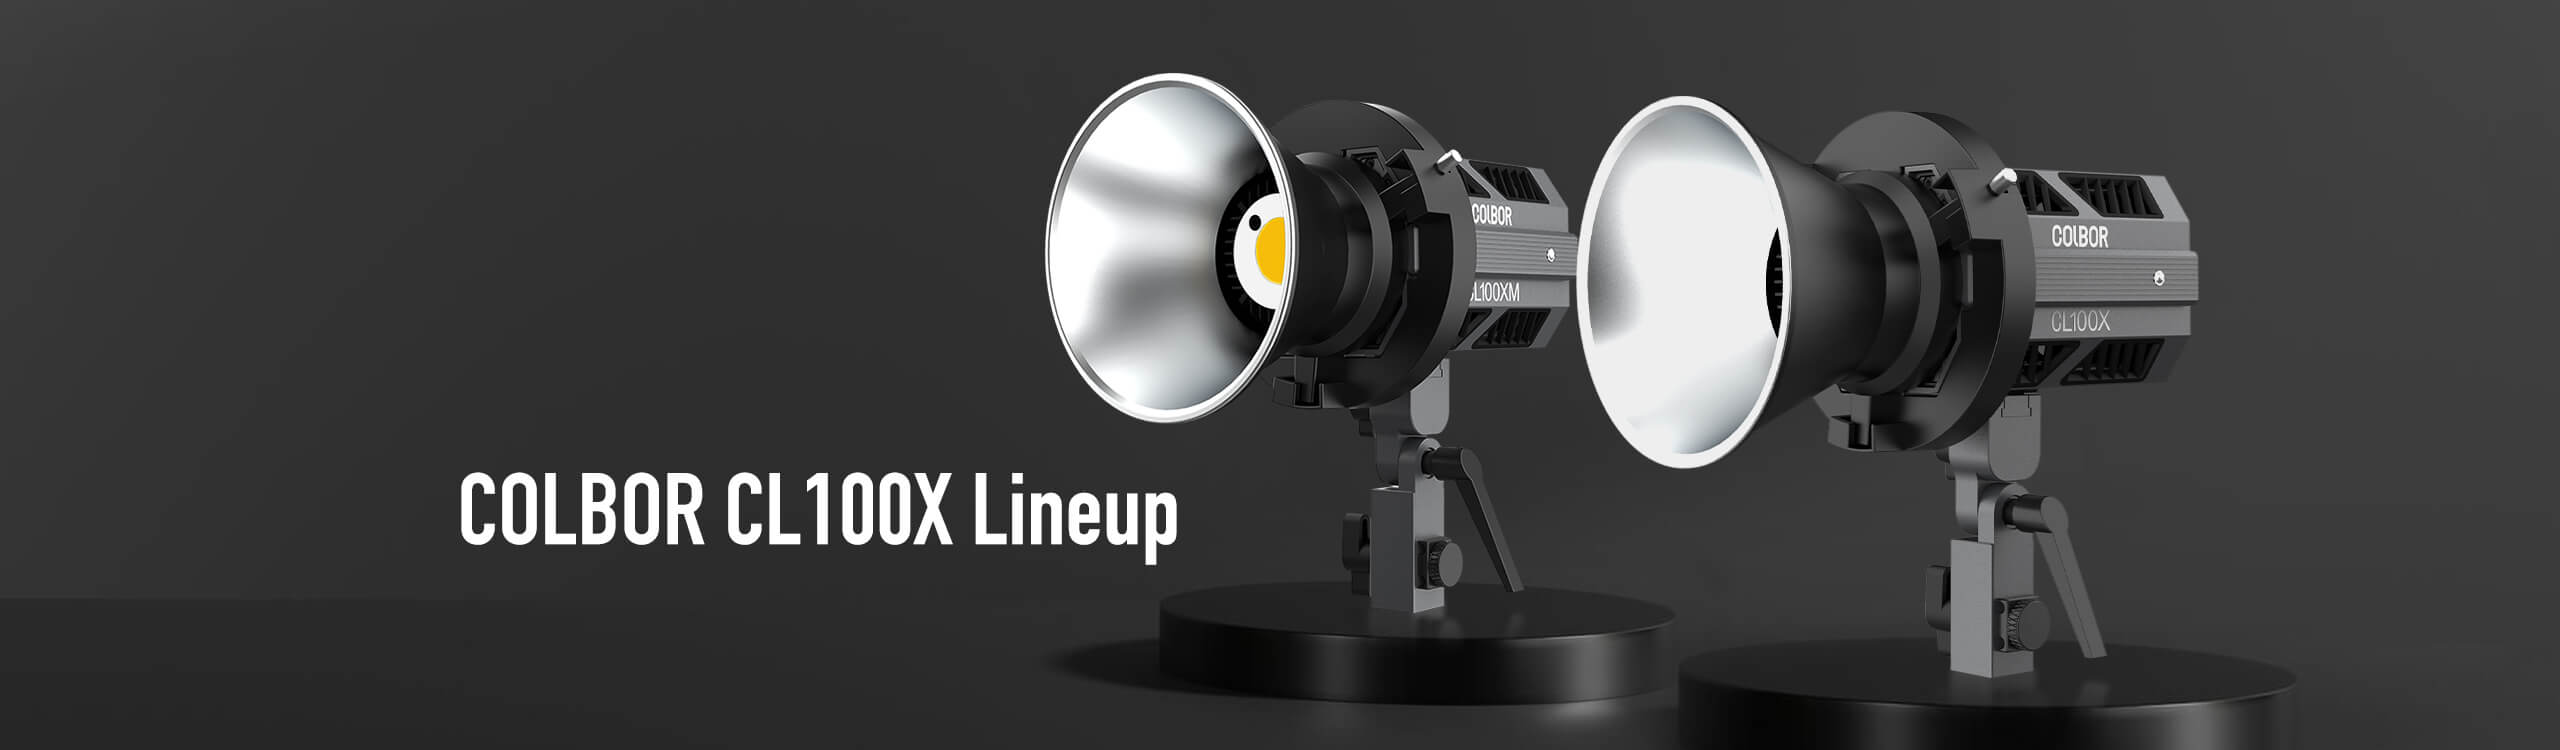 COLBOR CL100X LED lights for streaming come with a Bowen-mount adapter, a reflector, and a light base.